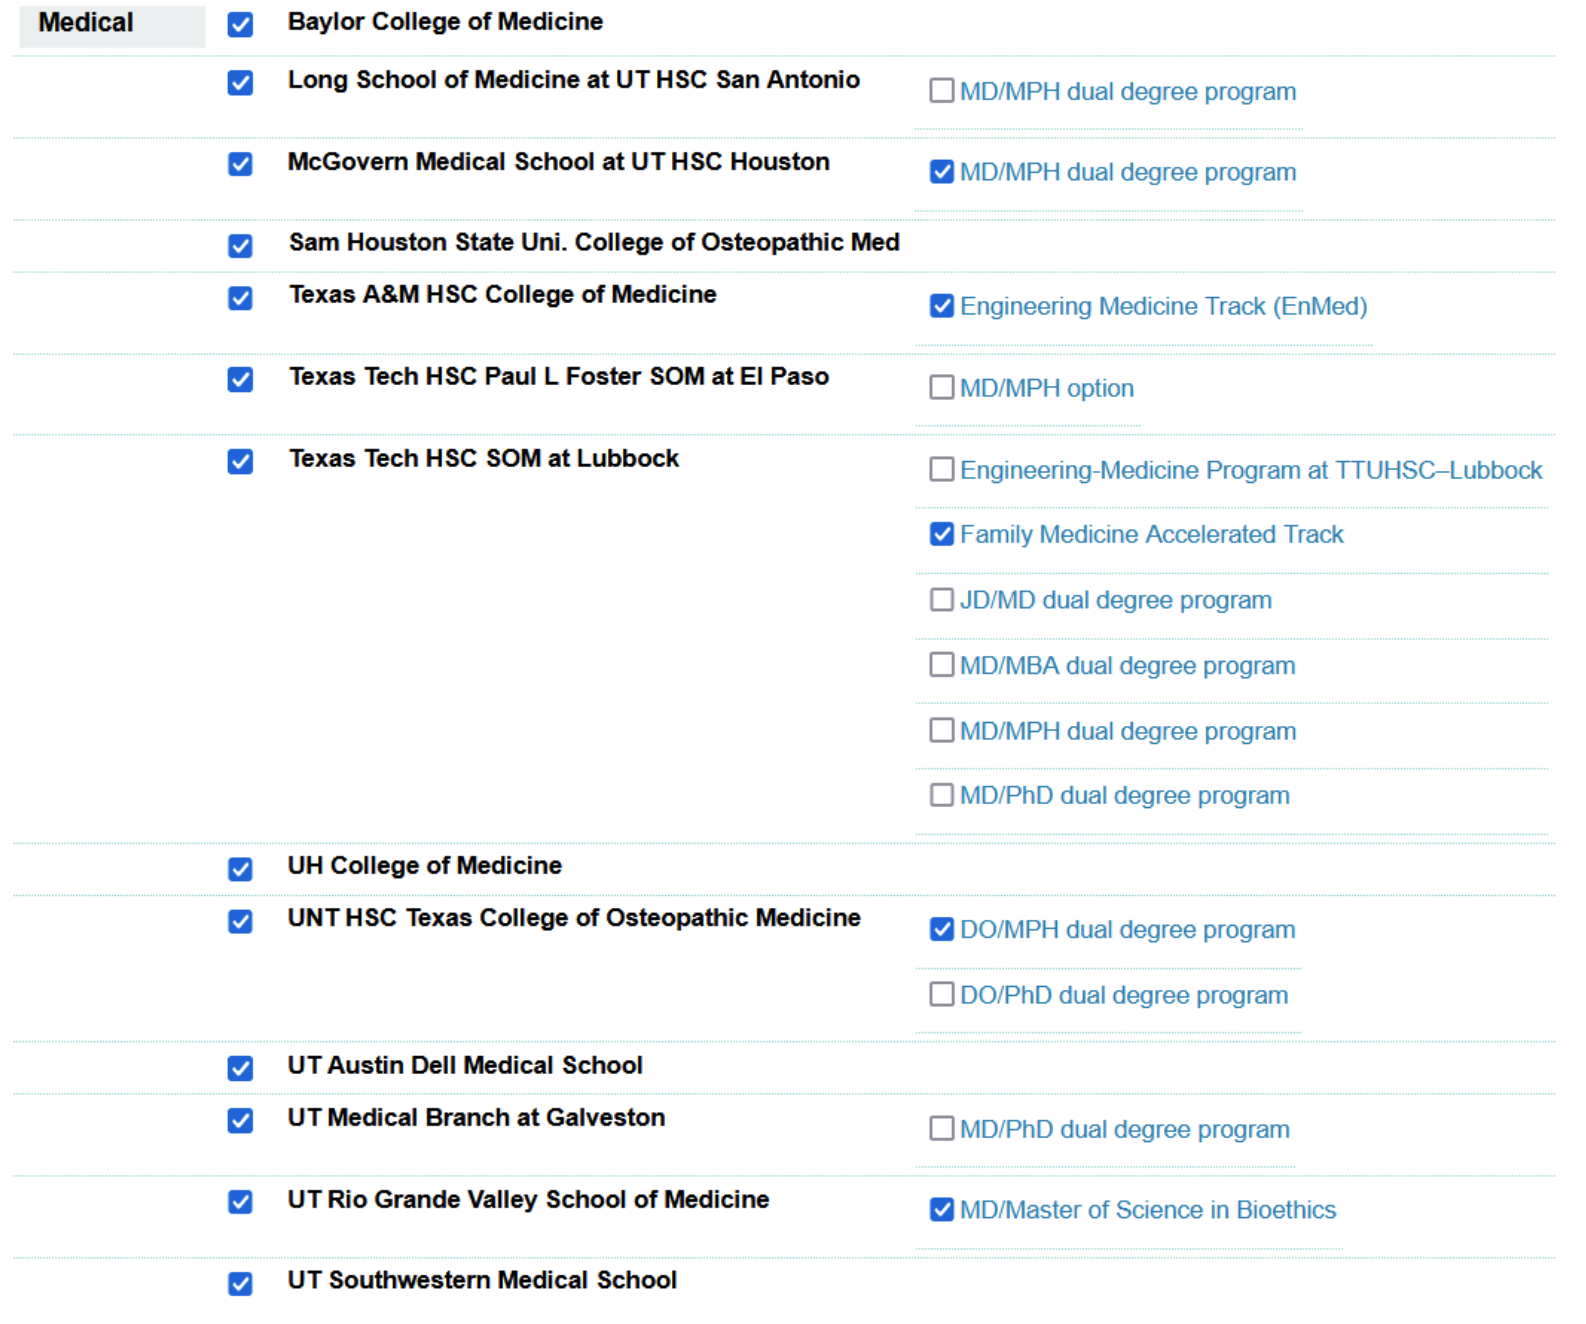 Dual degree programs offered at institutions via TMDSAS are listed on the right-hand side in blue.